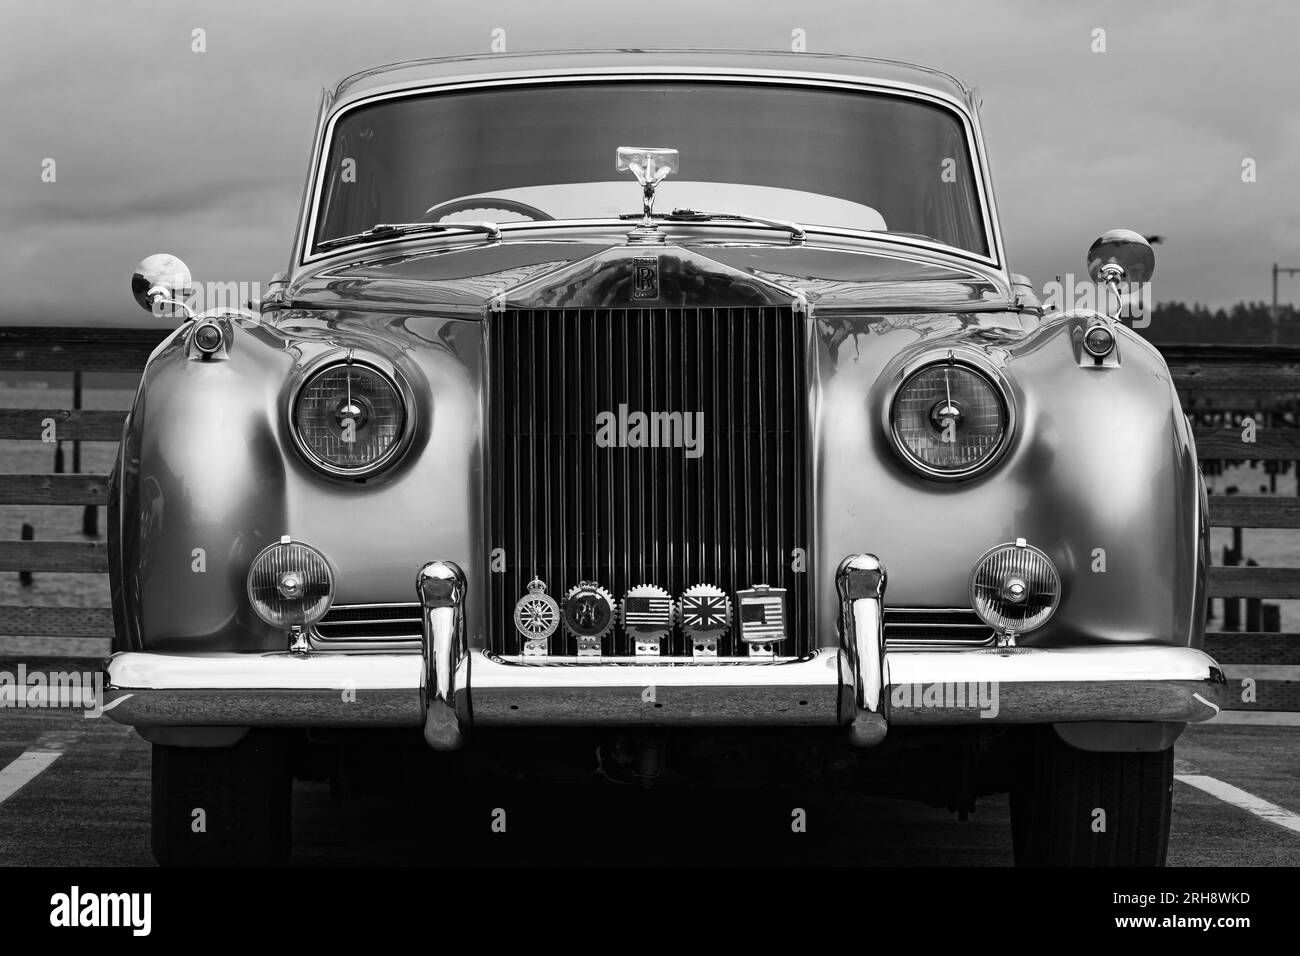 Front view of a vintage luxury car Rolls-Royce. Rolls Royce Silver Cloud Series classic car was the main model of the Rolls-Royce car range from April Stock Photo